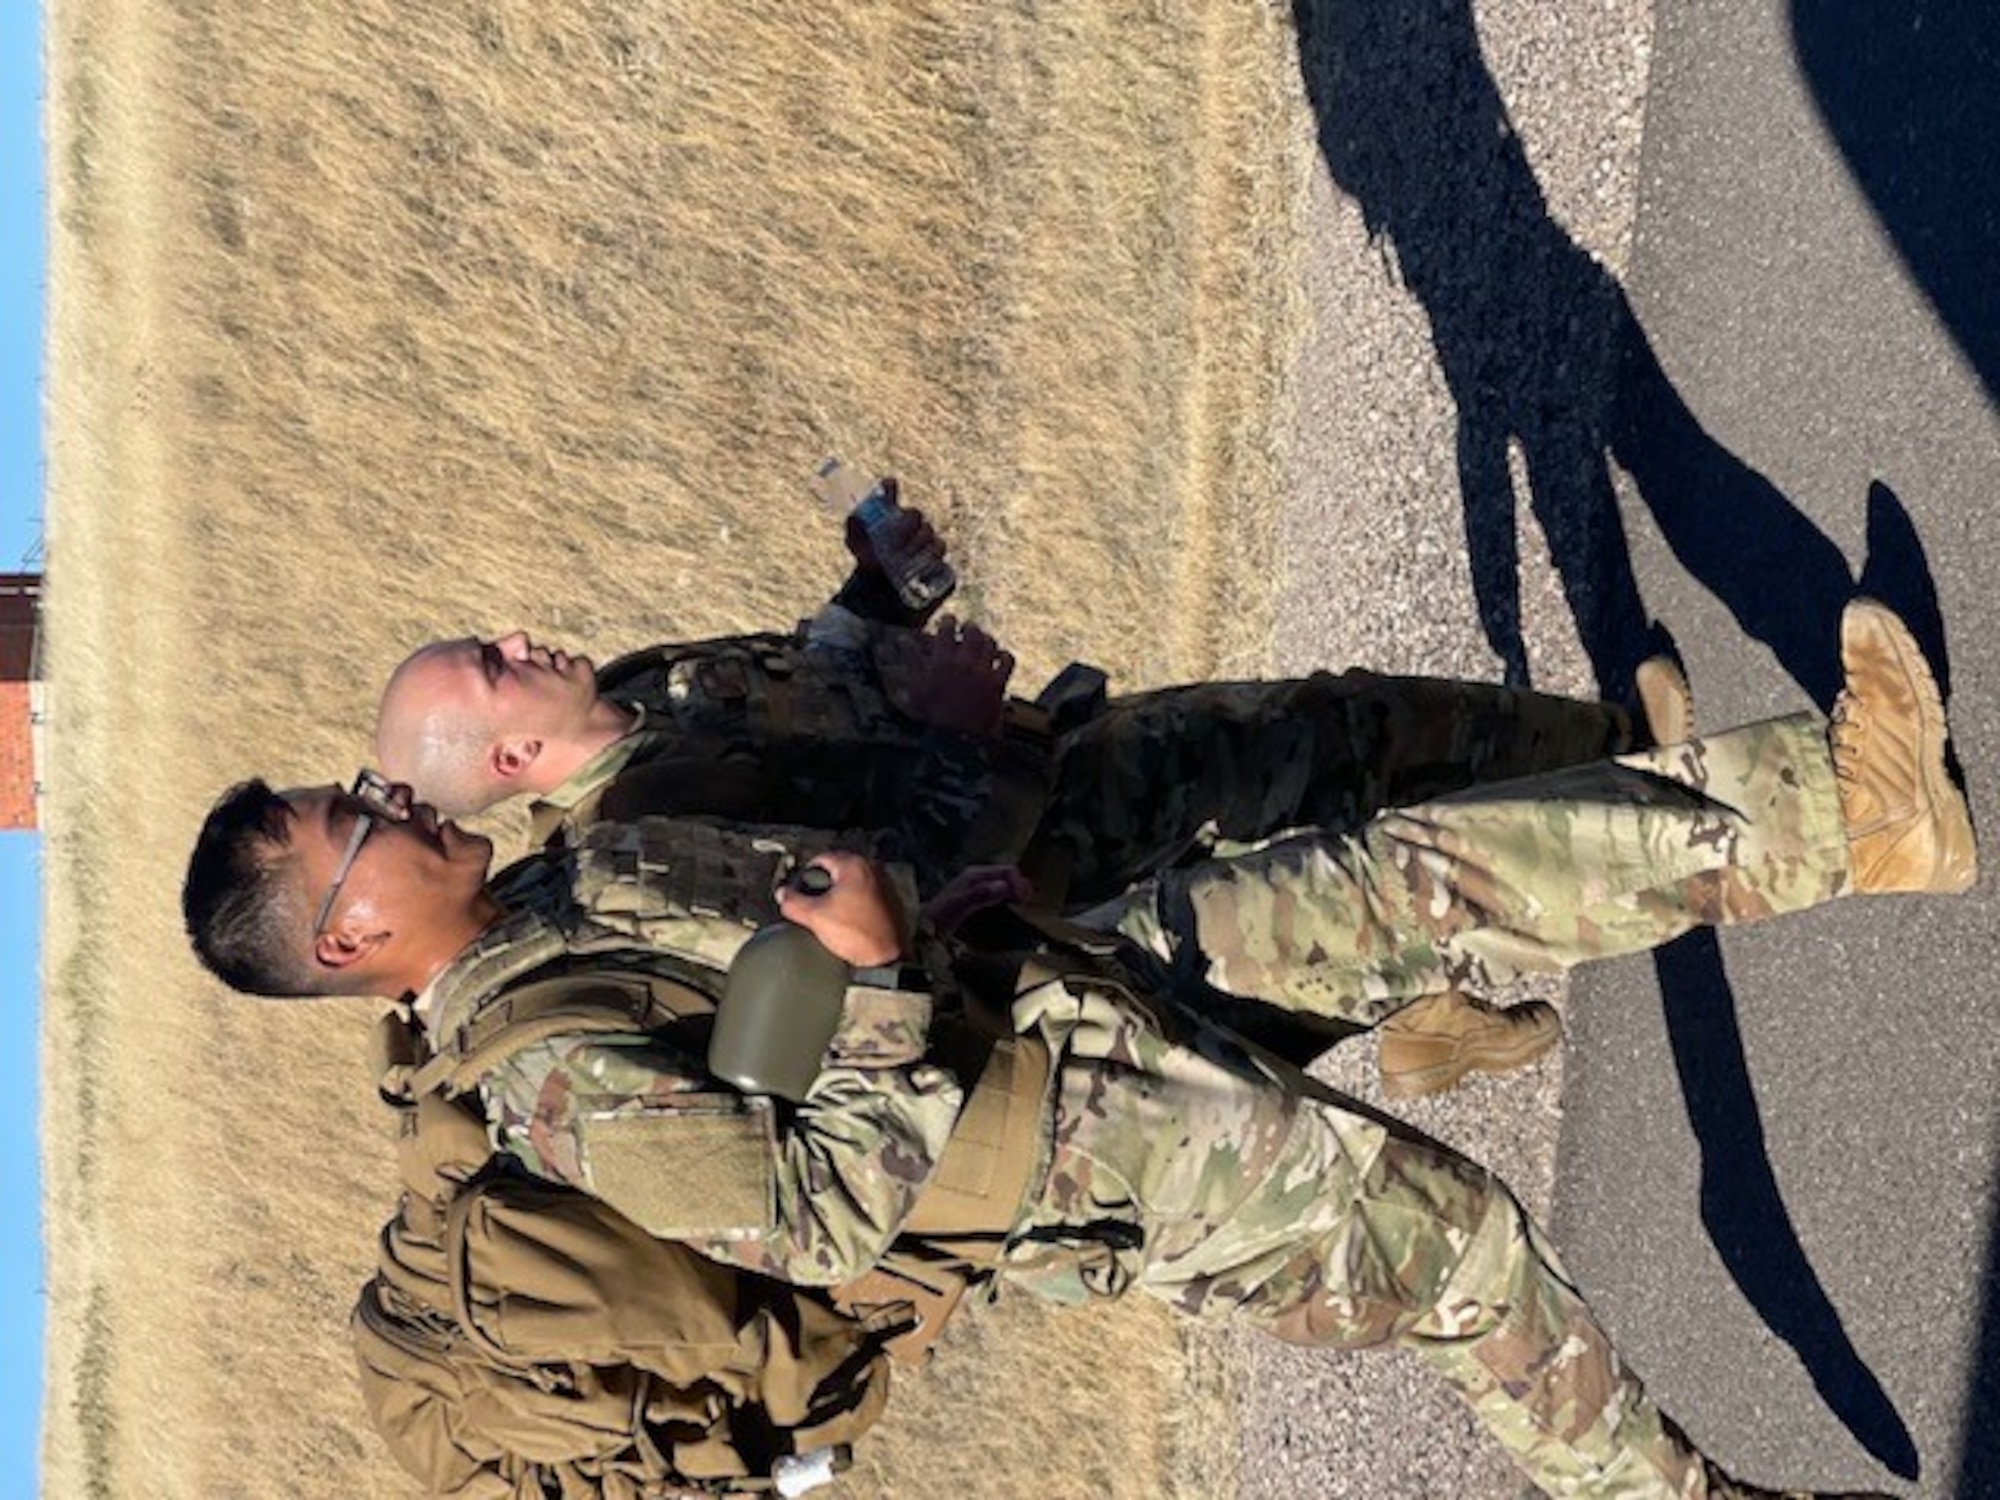 Two Airmen of the 90th Ground Combat Training Squadron recently graduated from the Army Air Assault School held in Fort Campbell, Kentucky. The Airmen are participating in a 12 mile ruck.